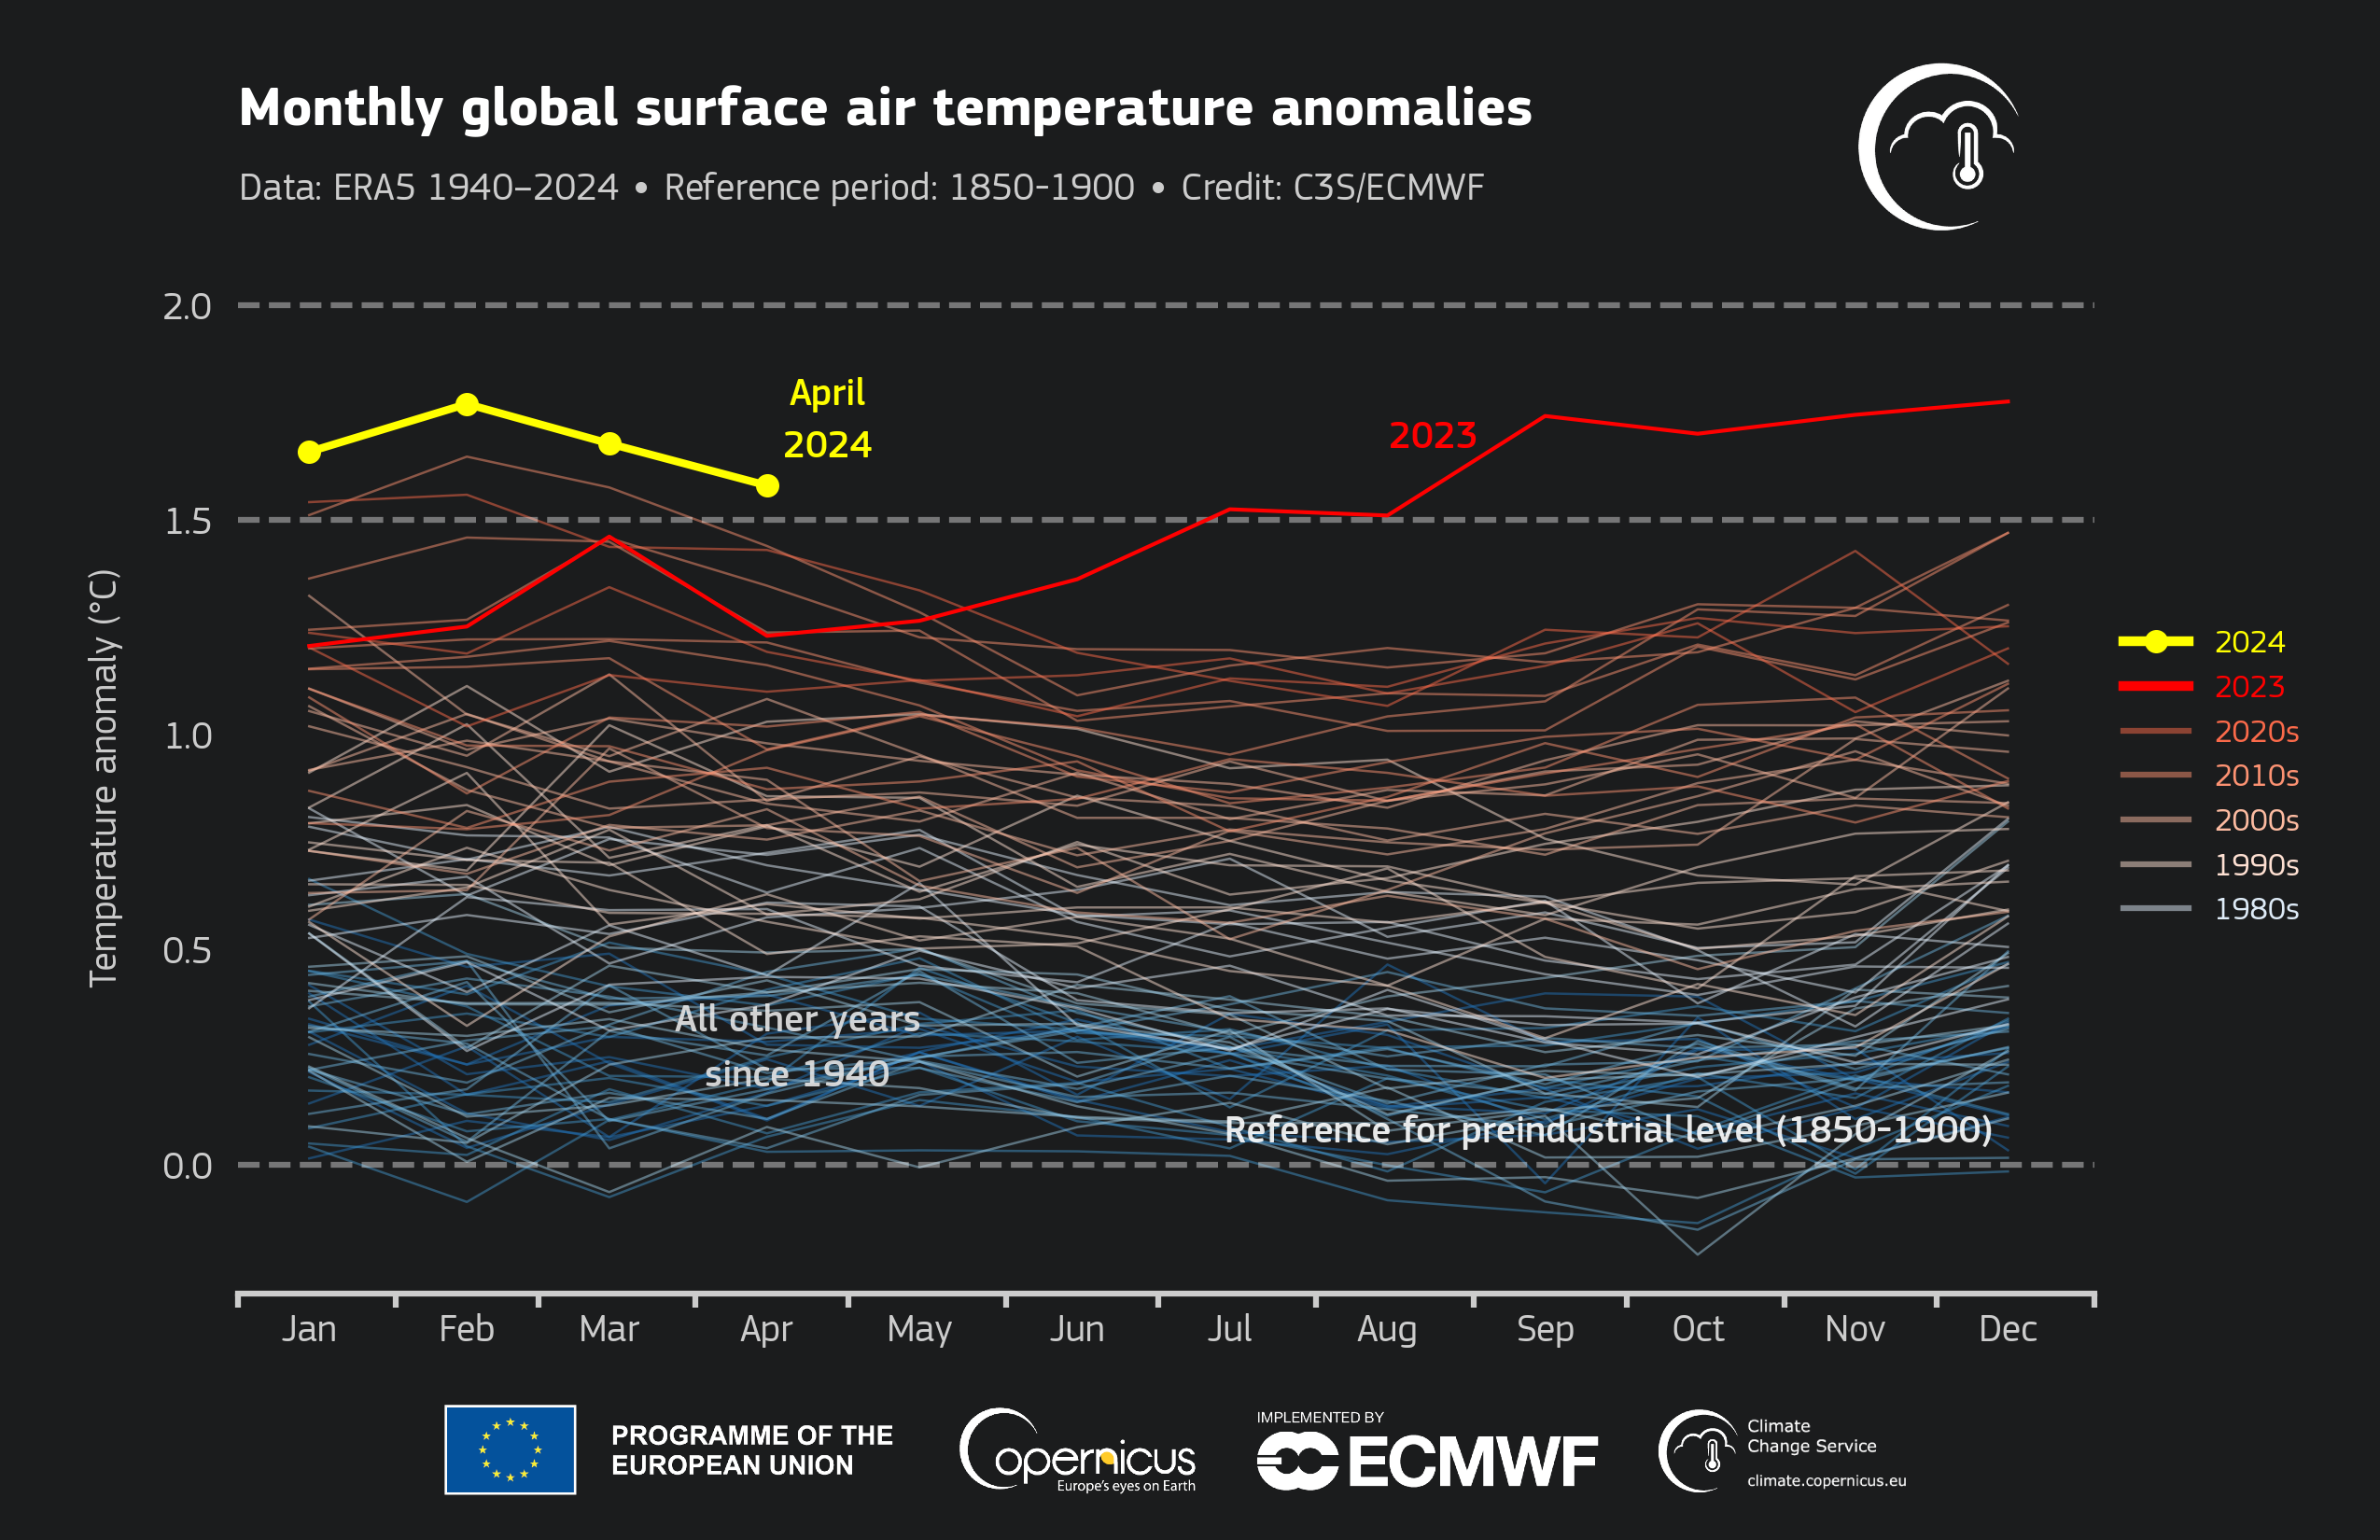 Graph from Copernicus shows yearly temperatures from 1940 with April 2024 (in yellow) considerably hotter than all previous years